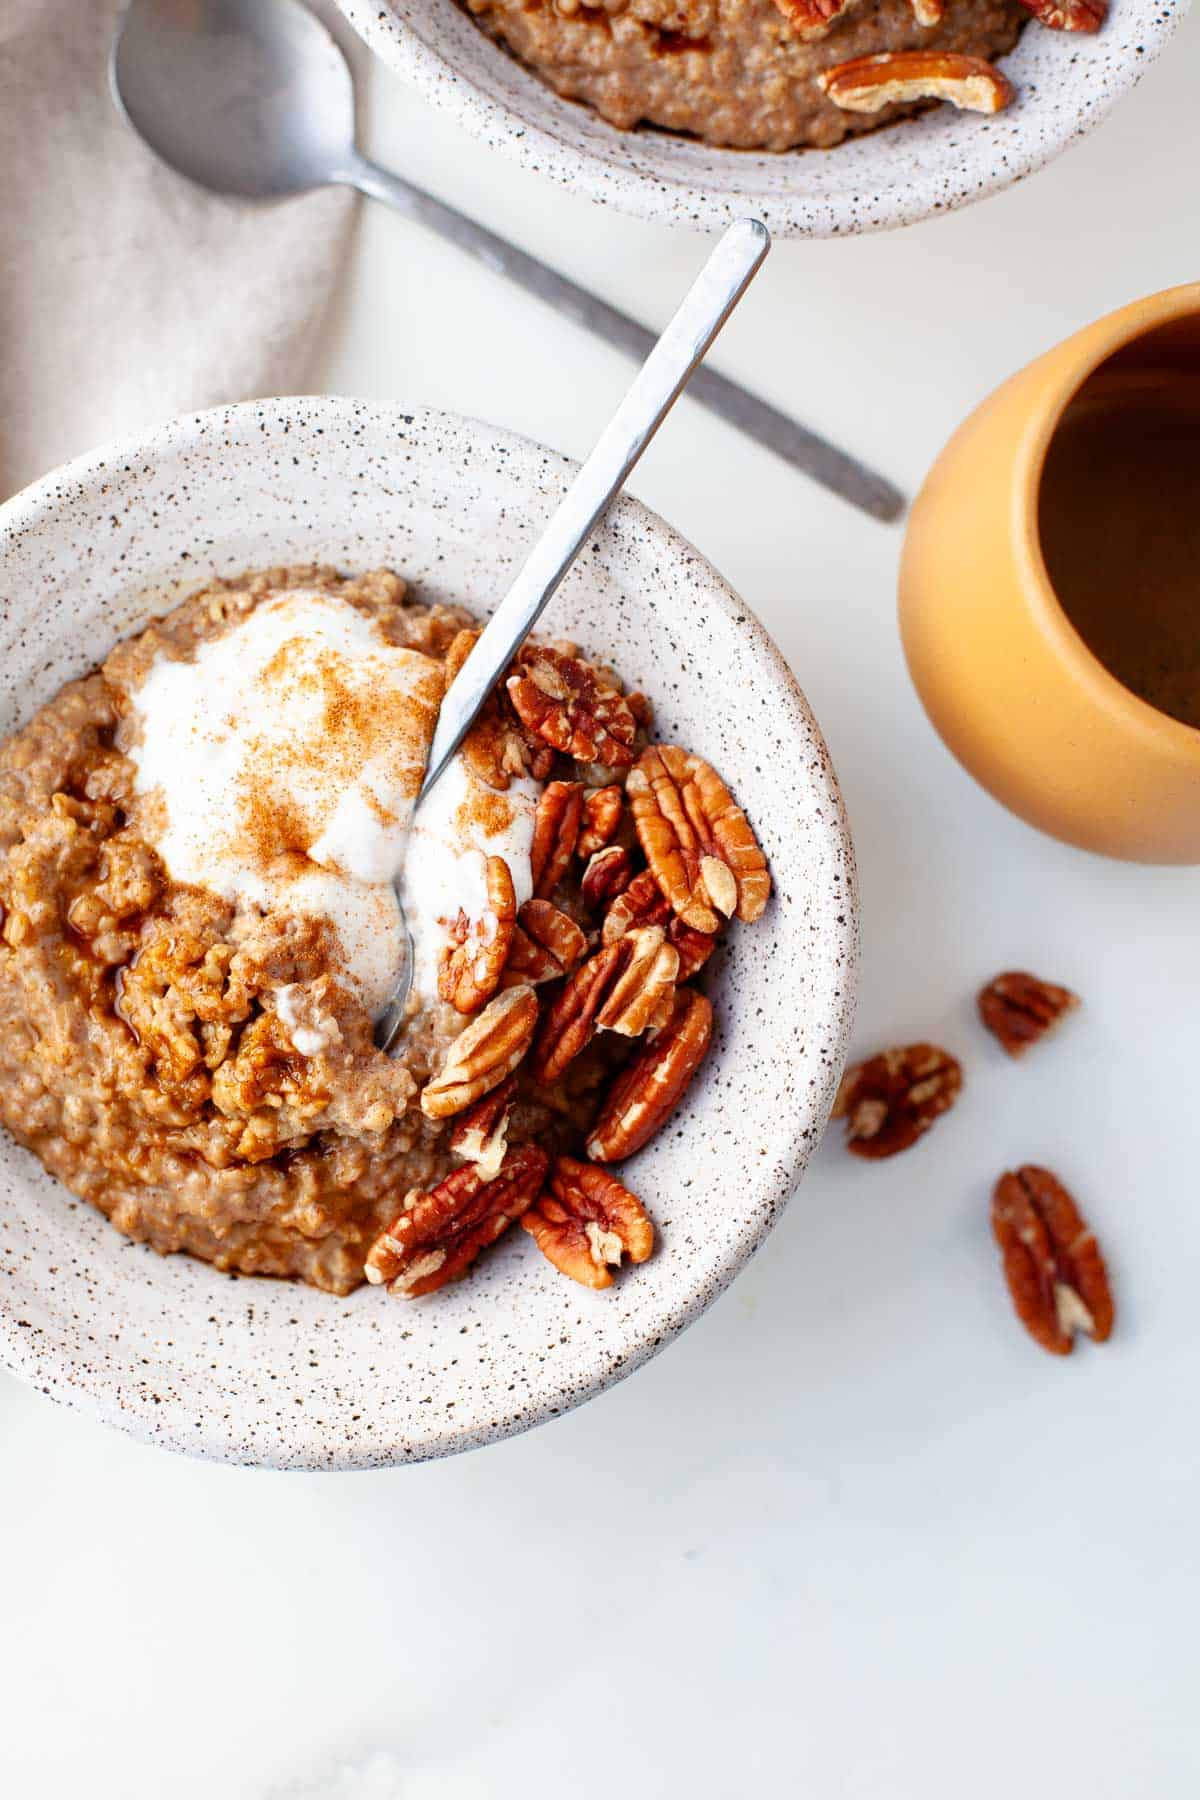 Gingerbread Oatmeal in a white speckled bowl garnished with pecans, yogurt, and cinnamon, with a silver spoon and tan coffee mug